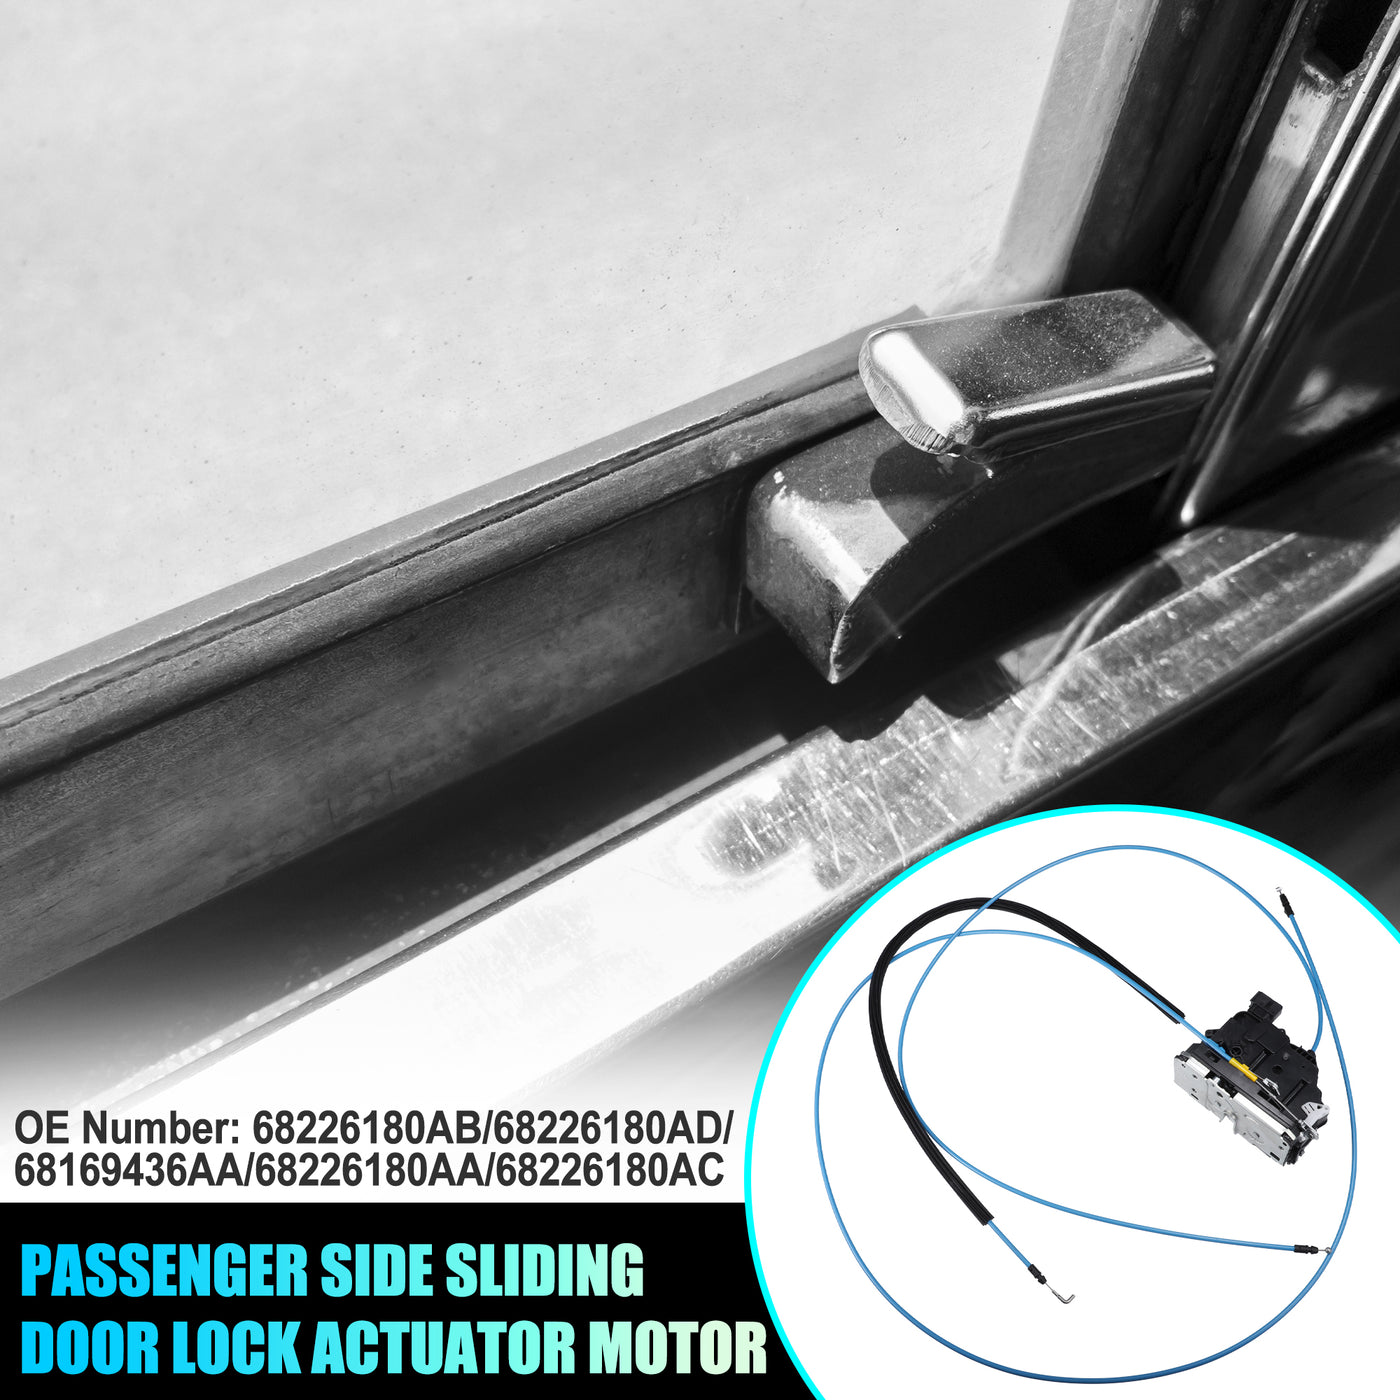 uxcell Uxcell No.68226180AA/68226180AD/68226180AB Passenger Side Sliding Door Lock Actuator Motor for Ram ProMaster 1500 2500 3500 2014-2018